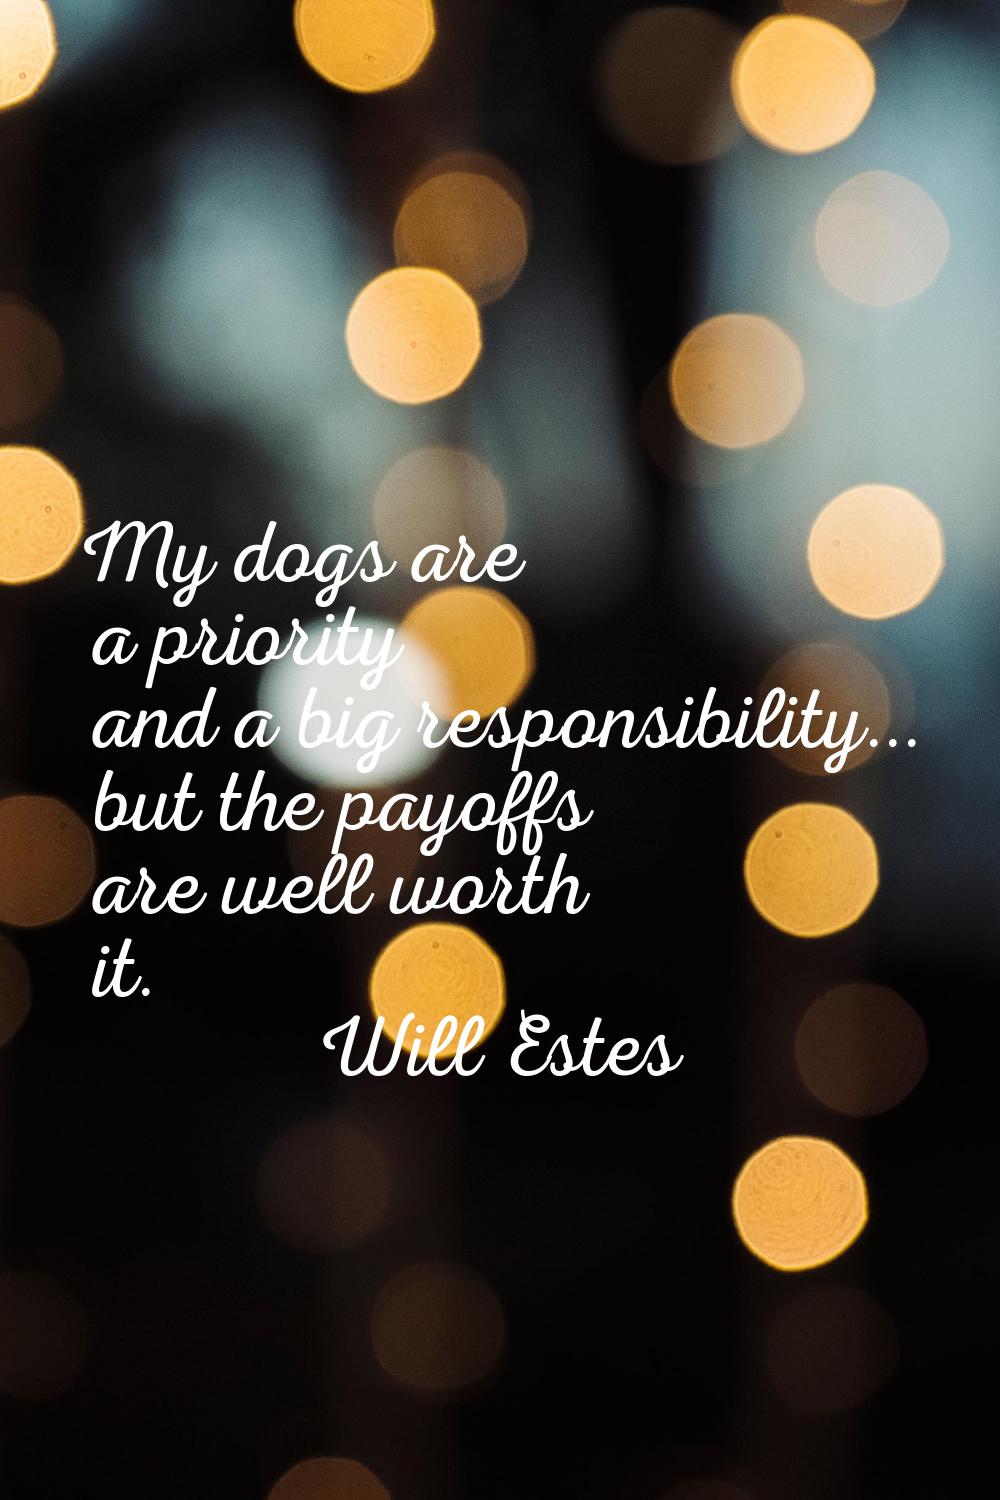 My dogs are a priority and a big responsibility... but the payoffs are well worth it.